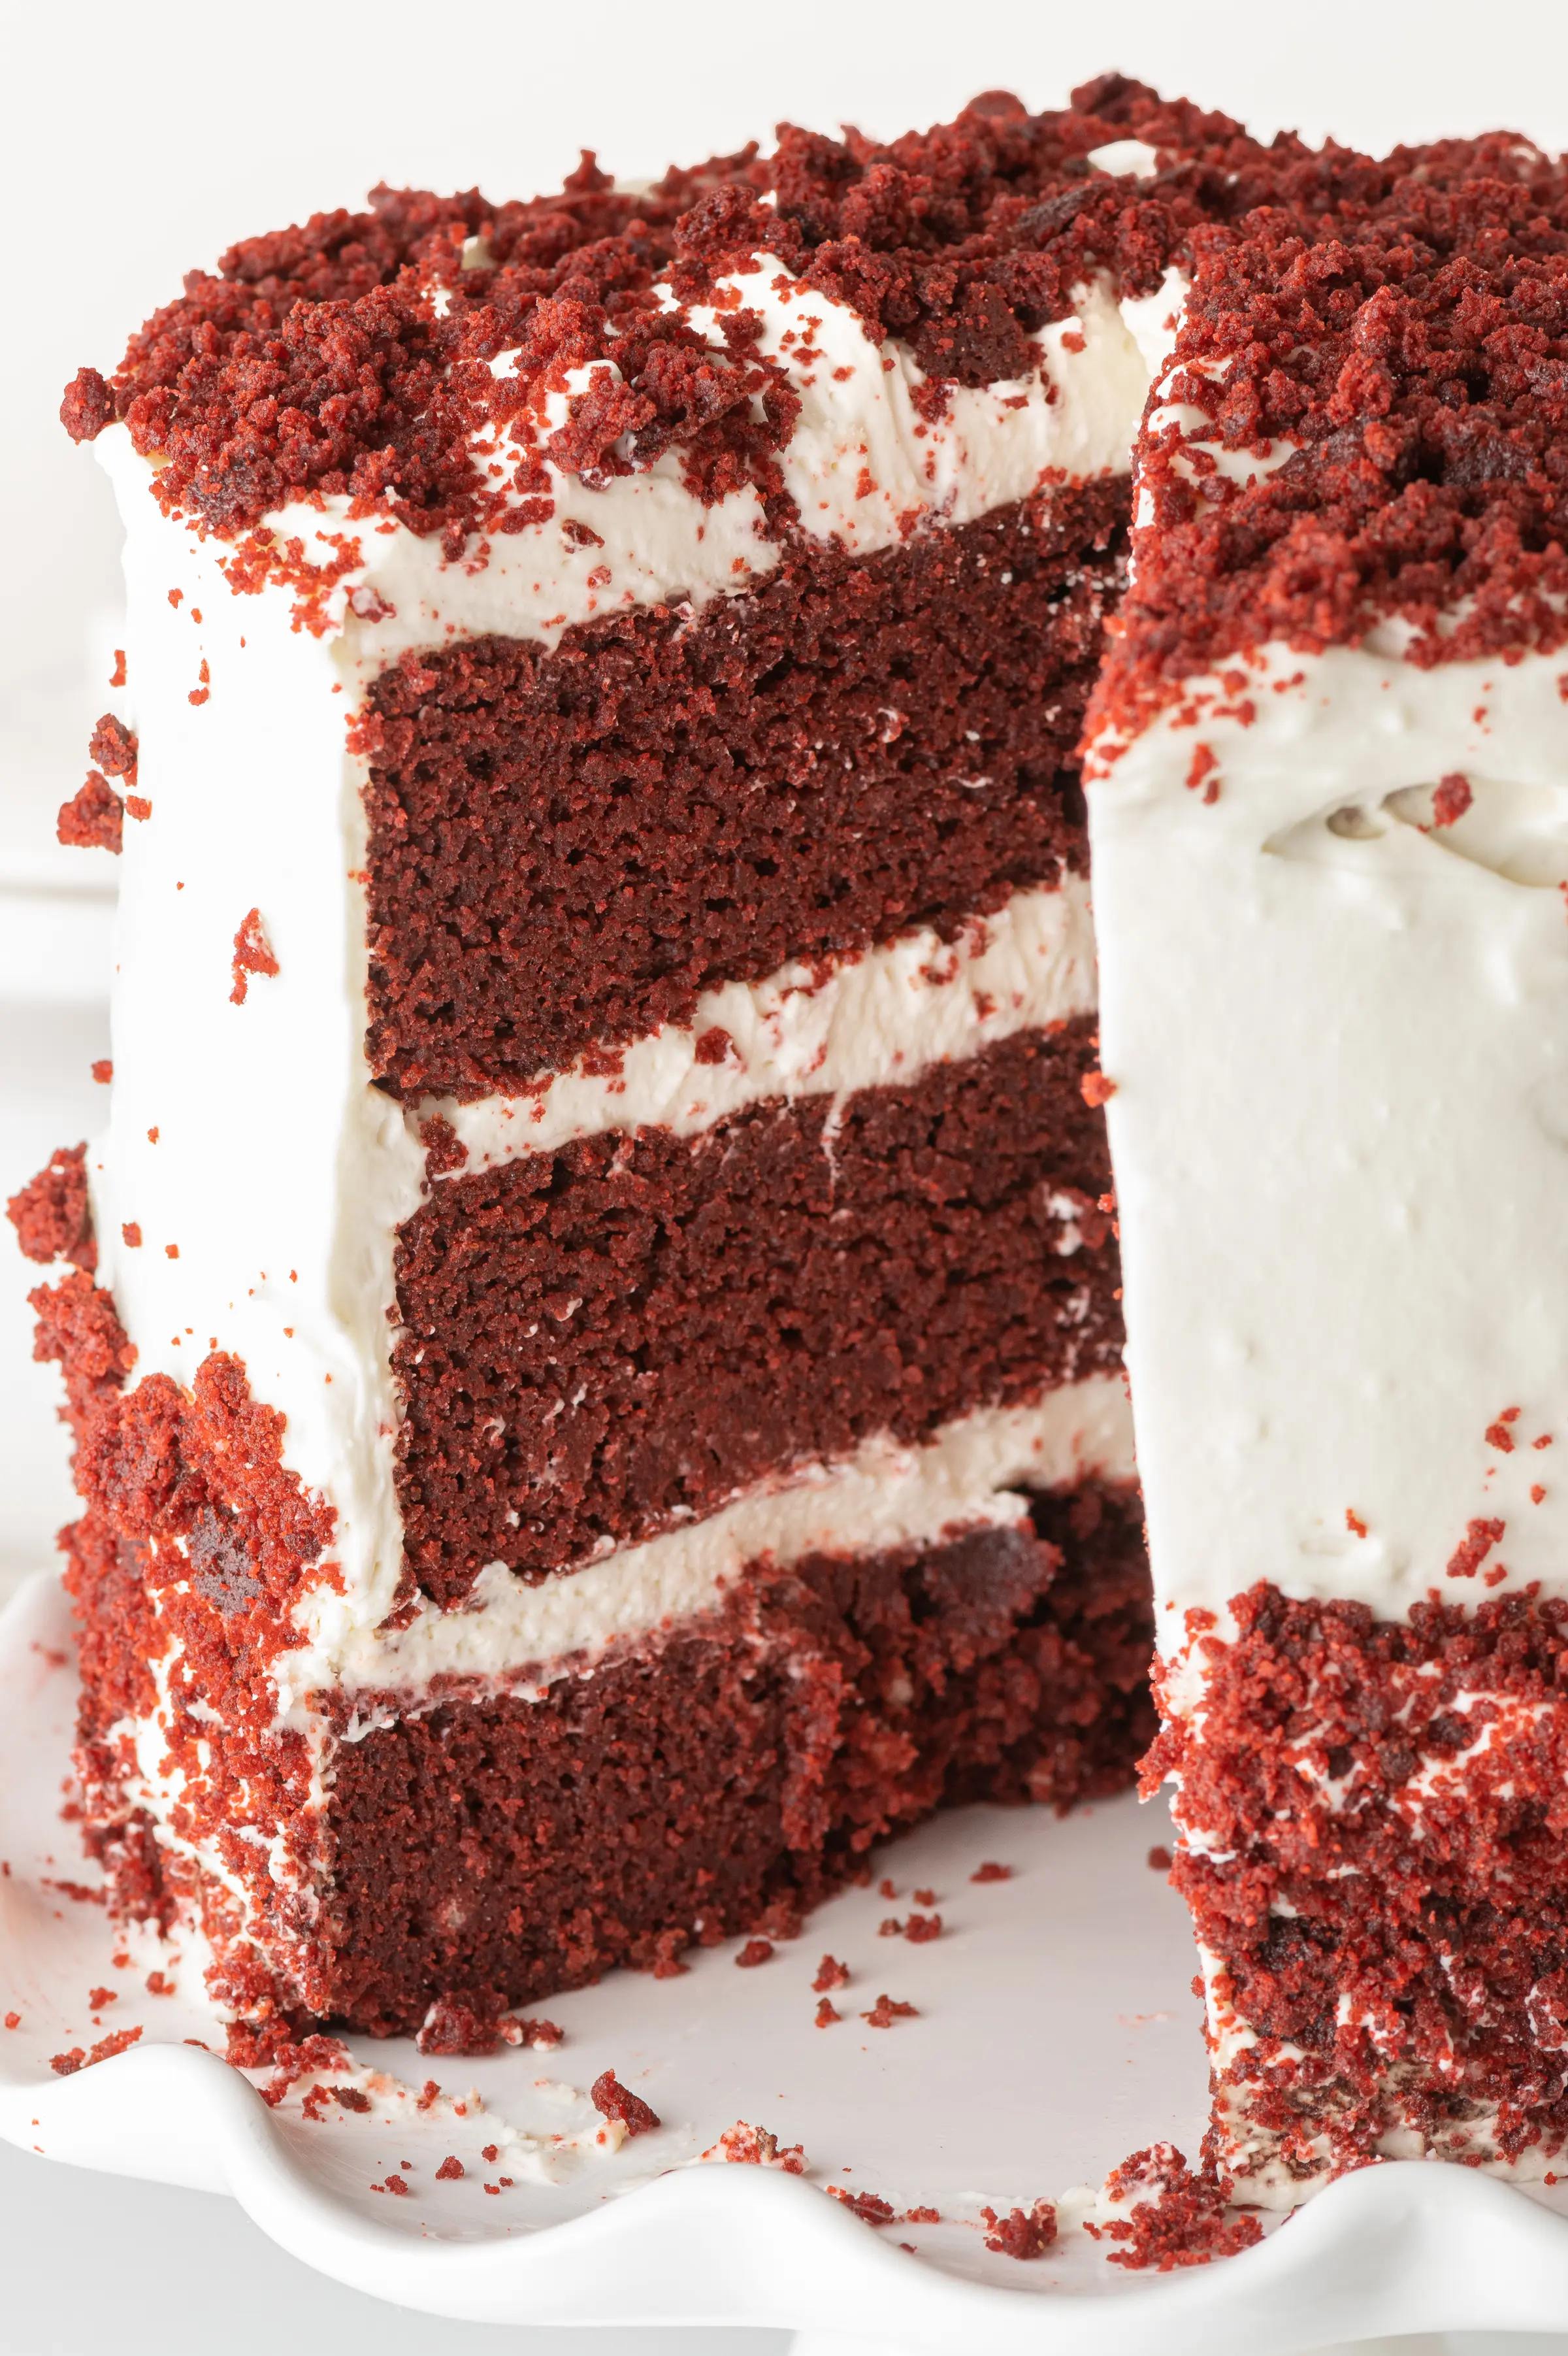 Low carb red velvet cake with white cream cheese frosting.  A slice is a removed and you can see the maroon layers contrasted against the bright white frosting. 